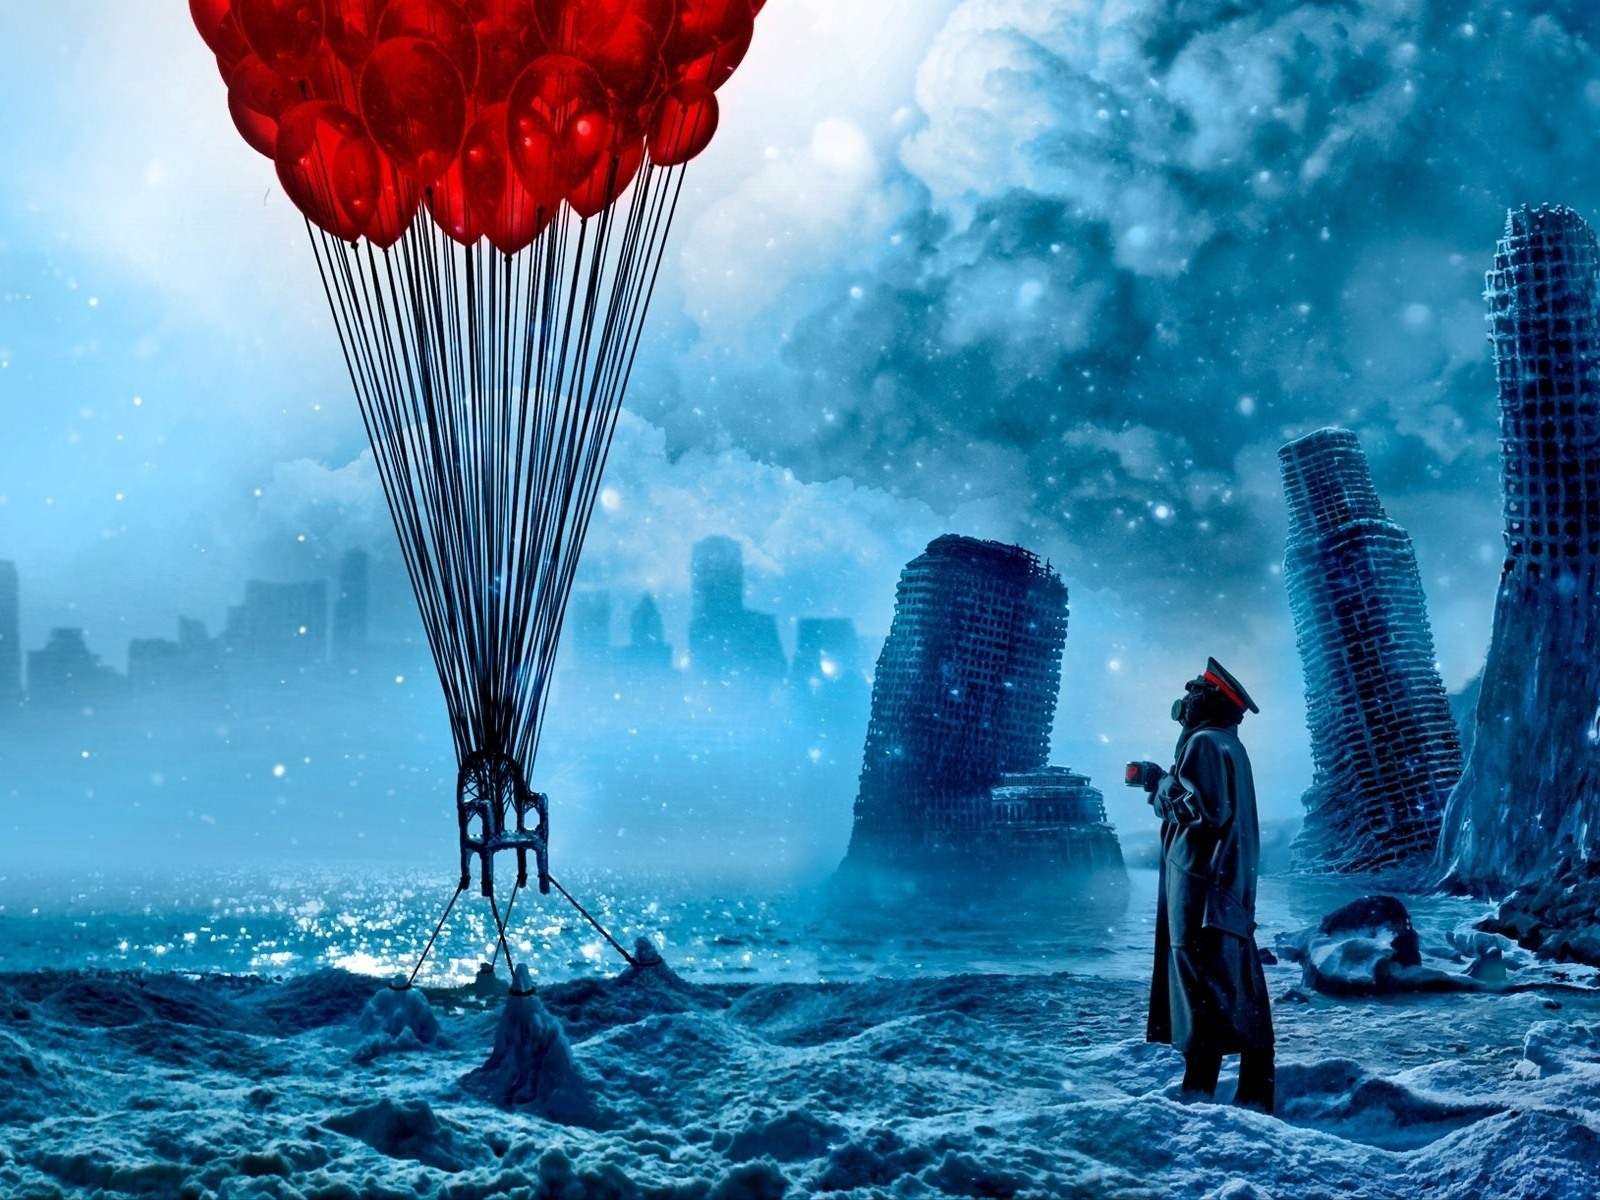 Romantically Apocalyptic creative painting wallpapers (1) #1 - 1600x1200